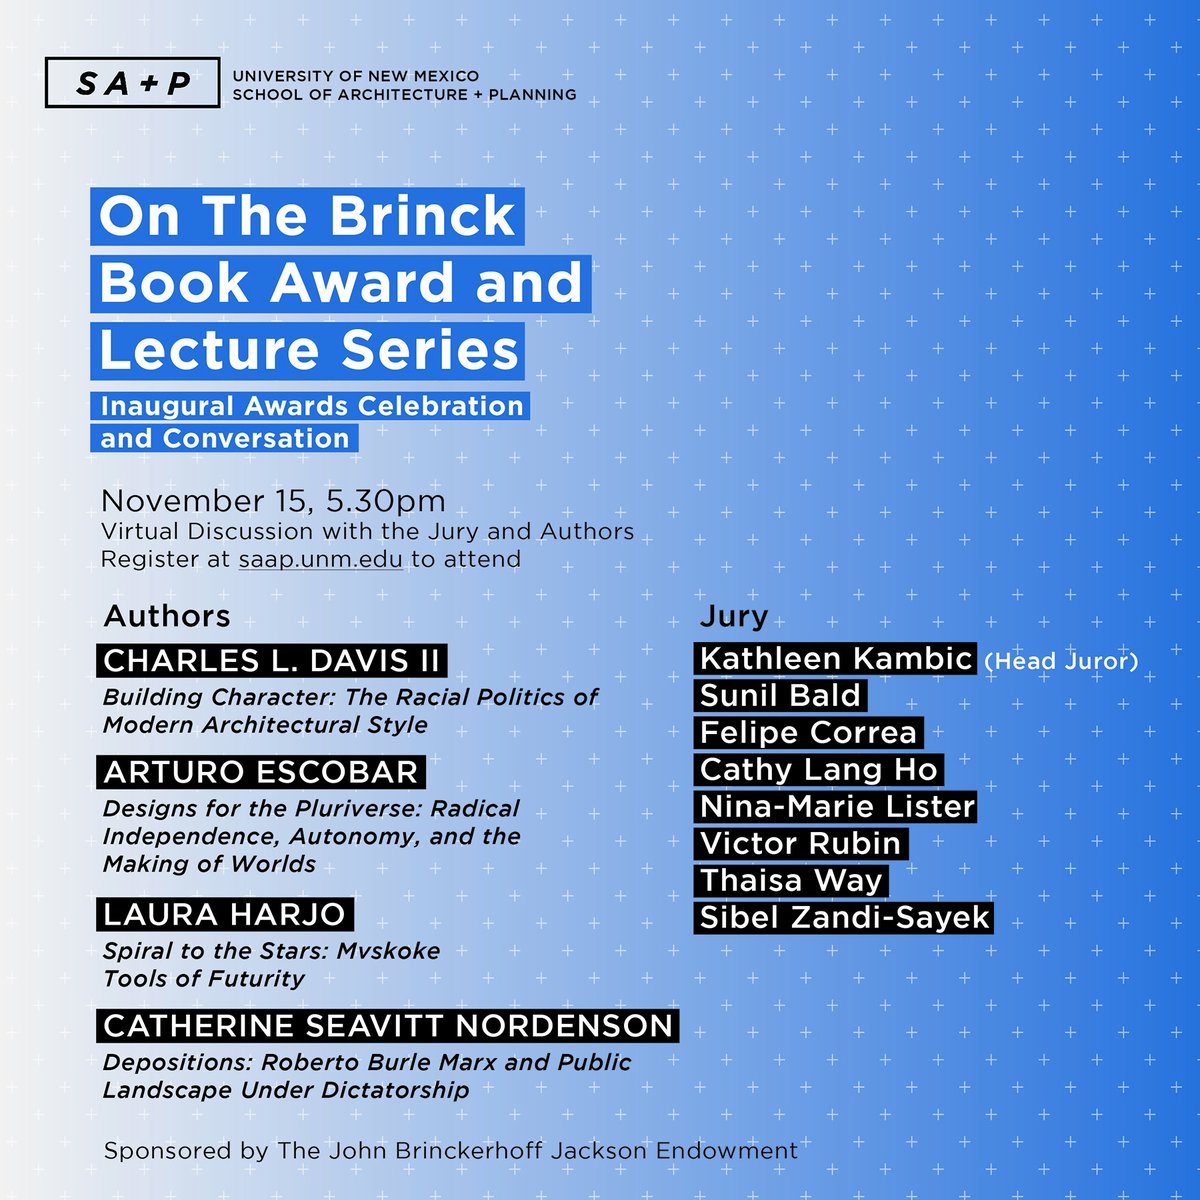 Join us for the inaugural On the Brinck Book Award and Lecture Series featuring a conversation with winning authors Charles L. Davis II, Arturo Escobar, Laura Harjo, and Catherine Seavitt Nordenson and the jury. Register to attend the virtual event: saap.unm.edu/news-events/ev…